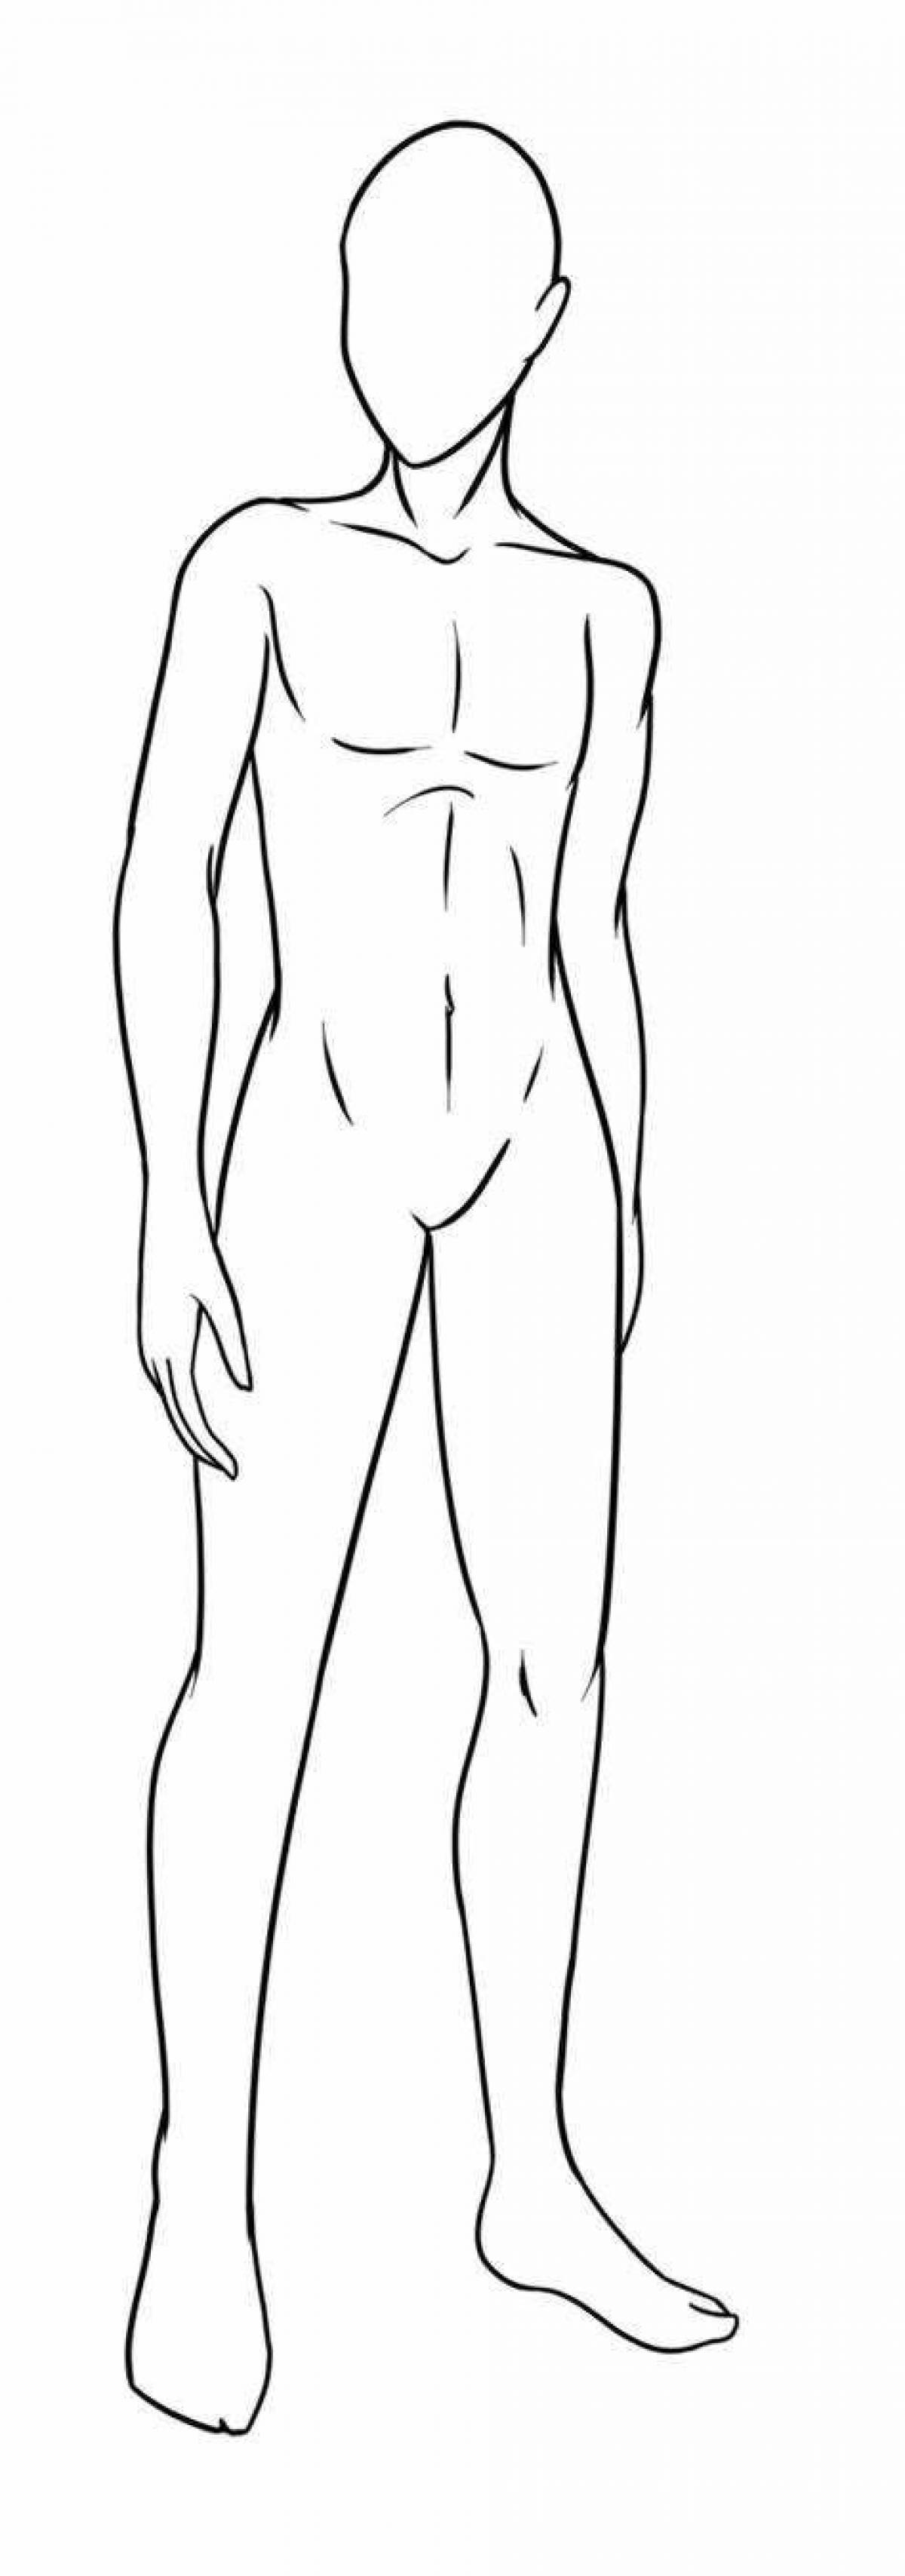 Exciting anime body coloring page